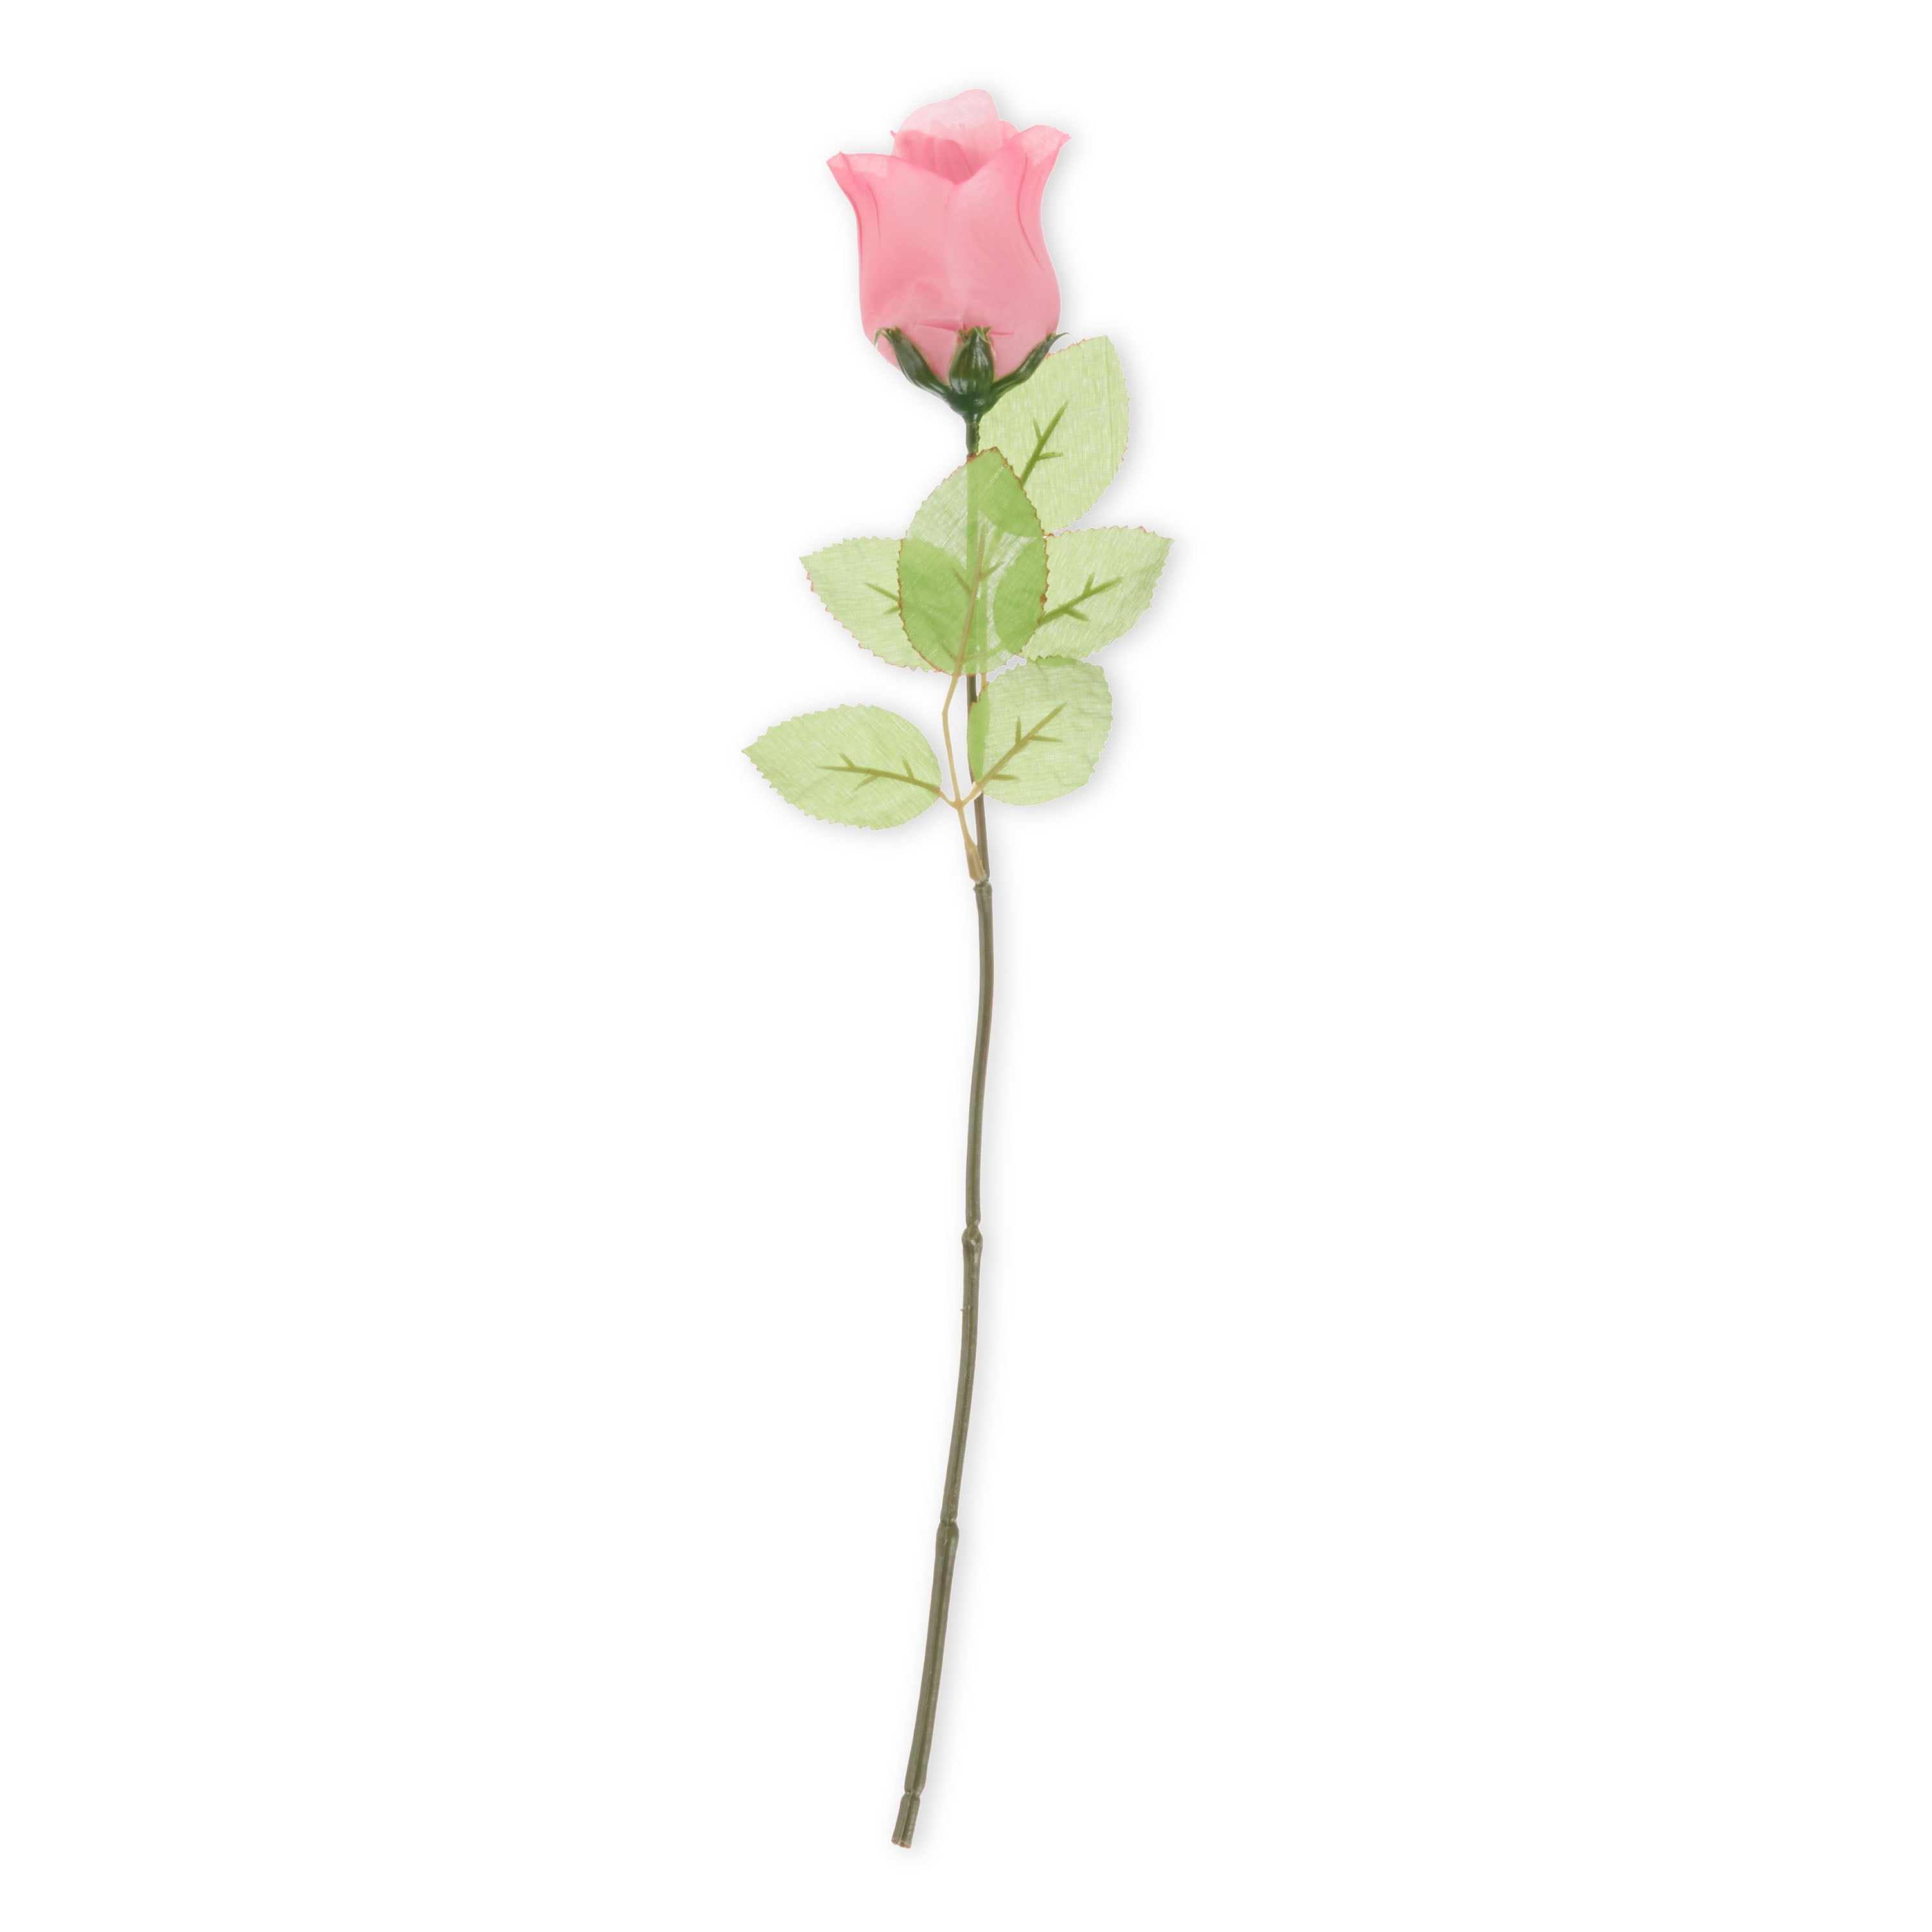 WAY TO CELEBRATE! Way to Celebrate Scented Pink Artificial Rose Stem, 17 inch Valentine Decoration